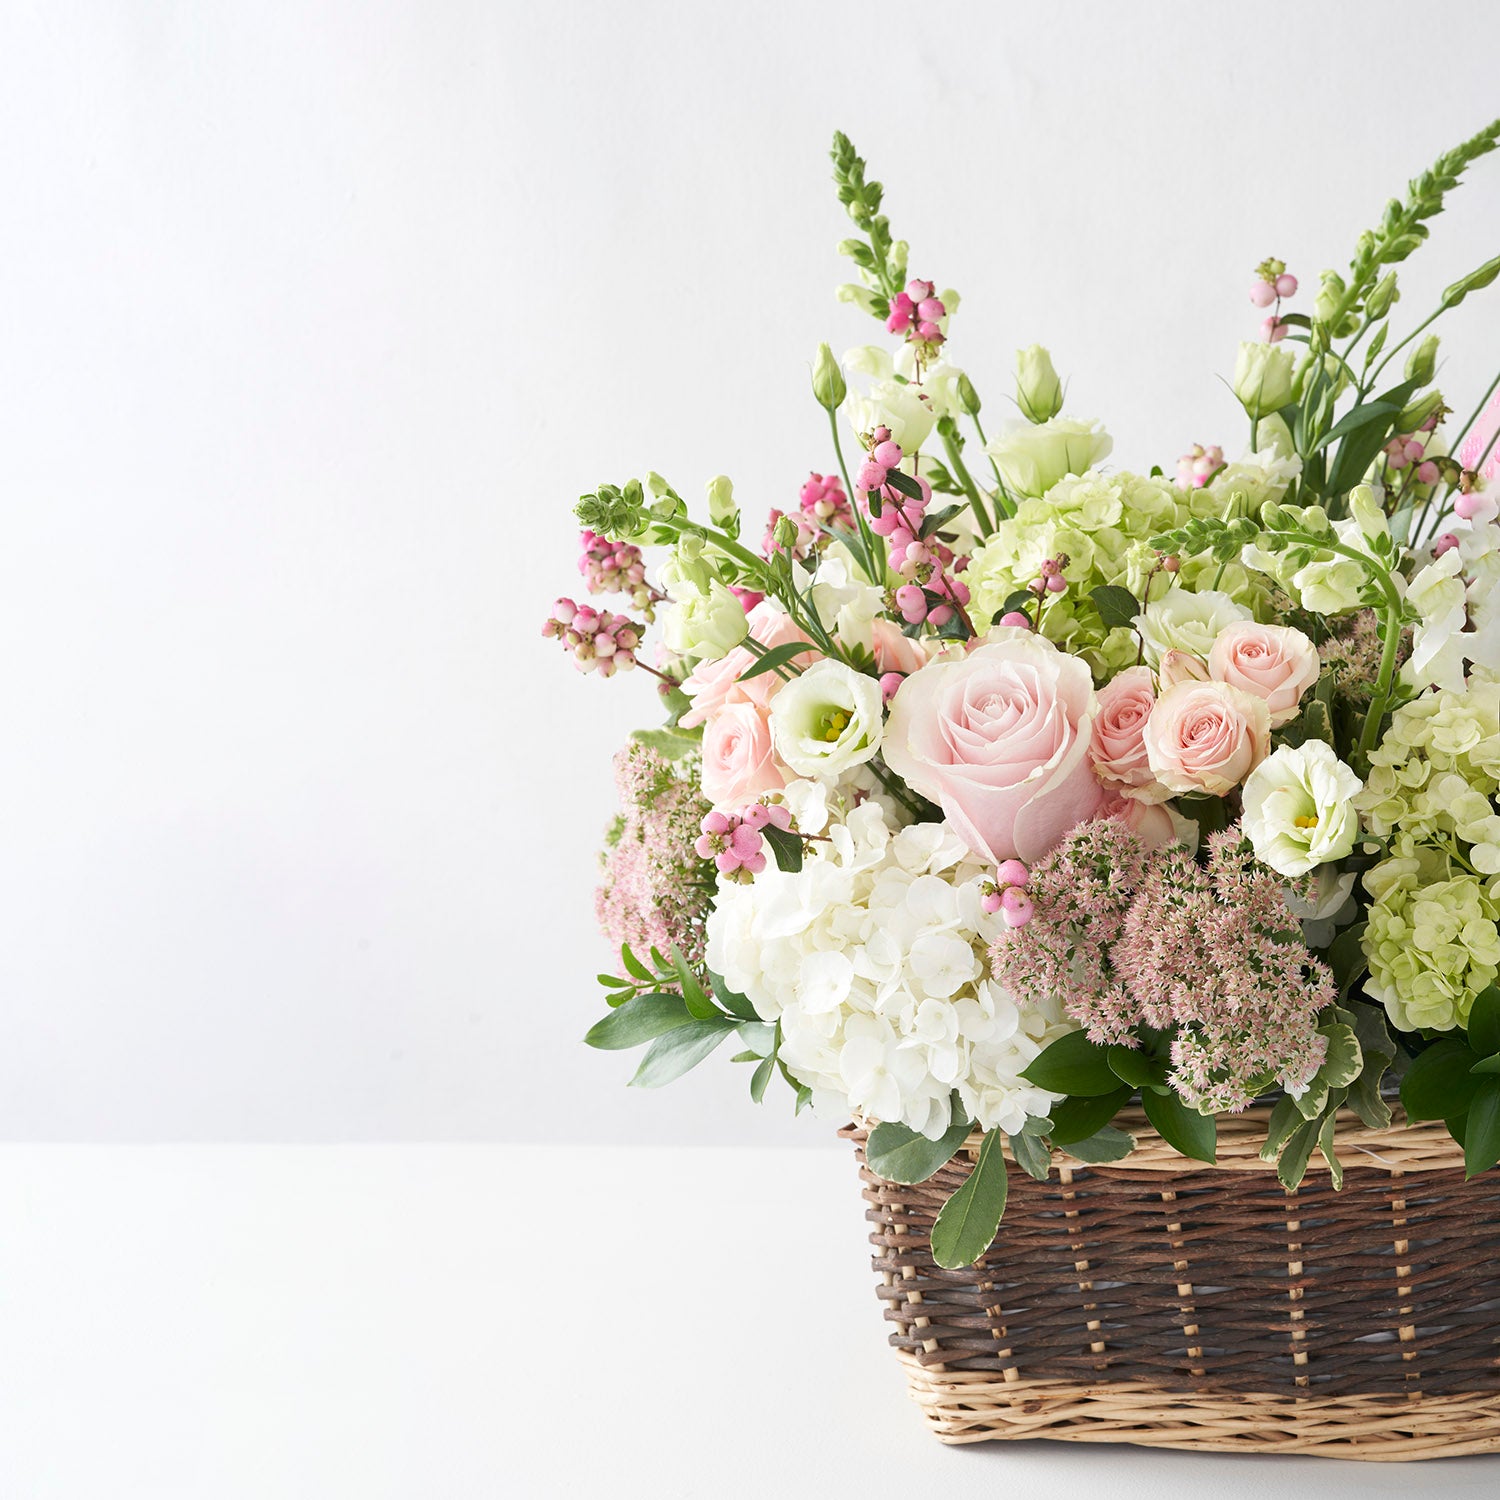 Natural basket filled with pale pink, white, and soft green flowers.